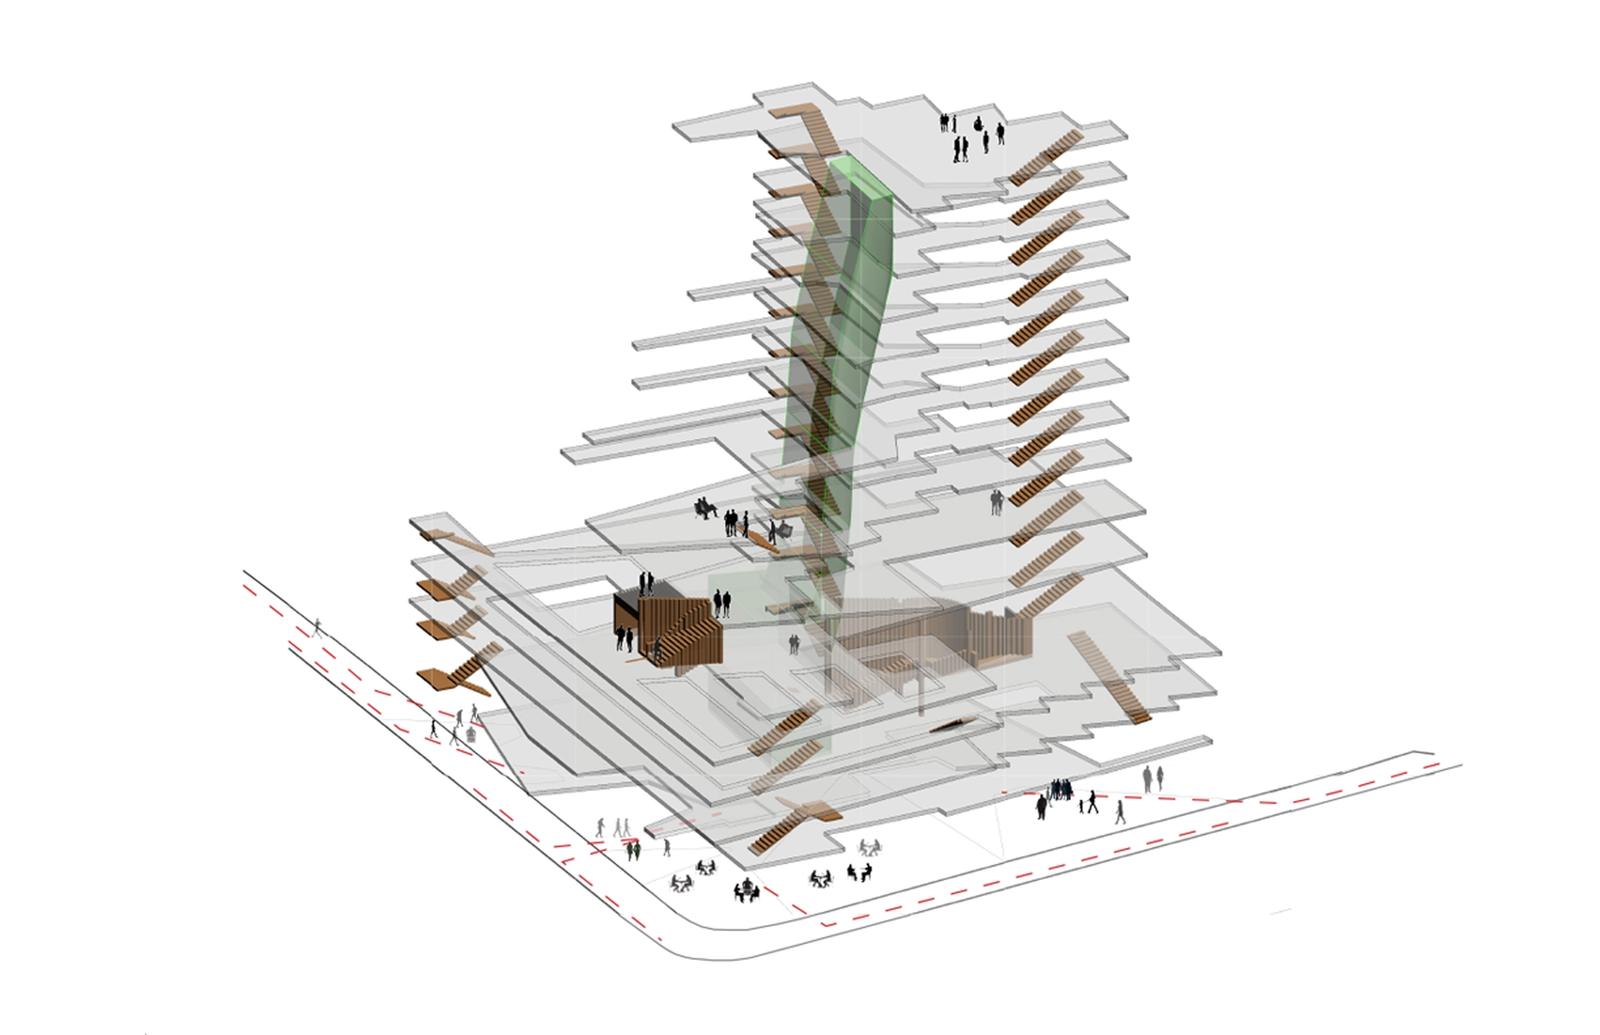 Solar chimney, shown in green, connects spaces vertically throughout the building. Stair circulation reinforces the vertical connection.